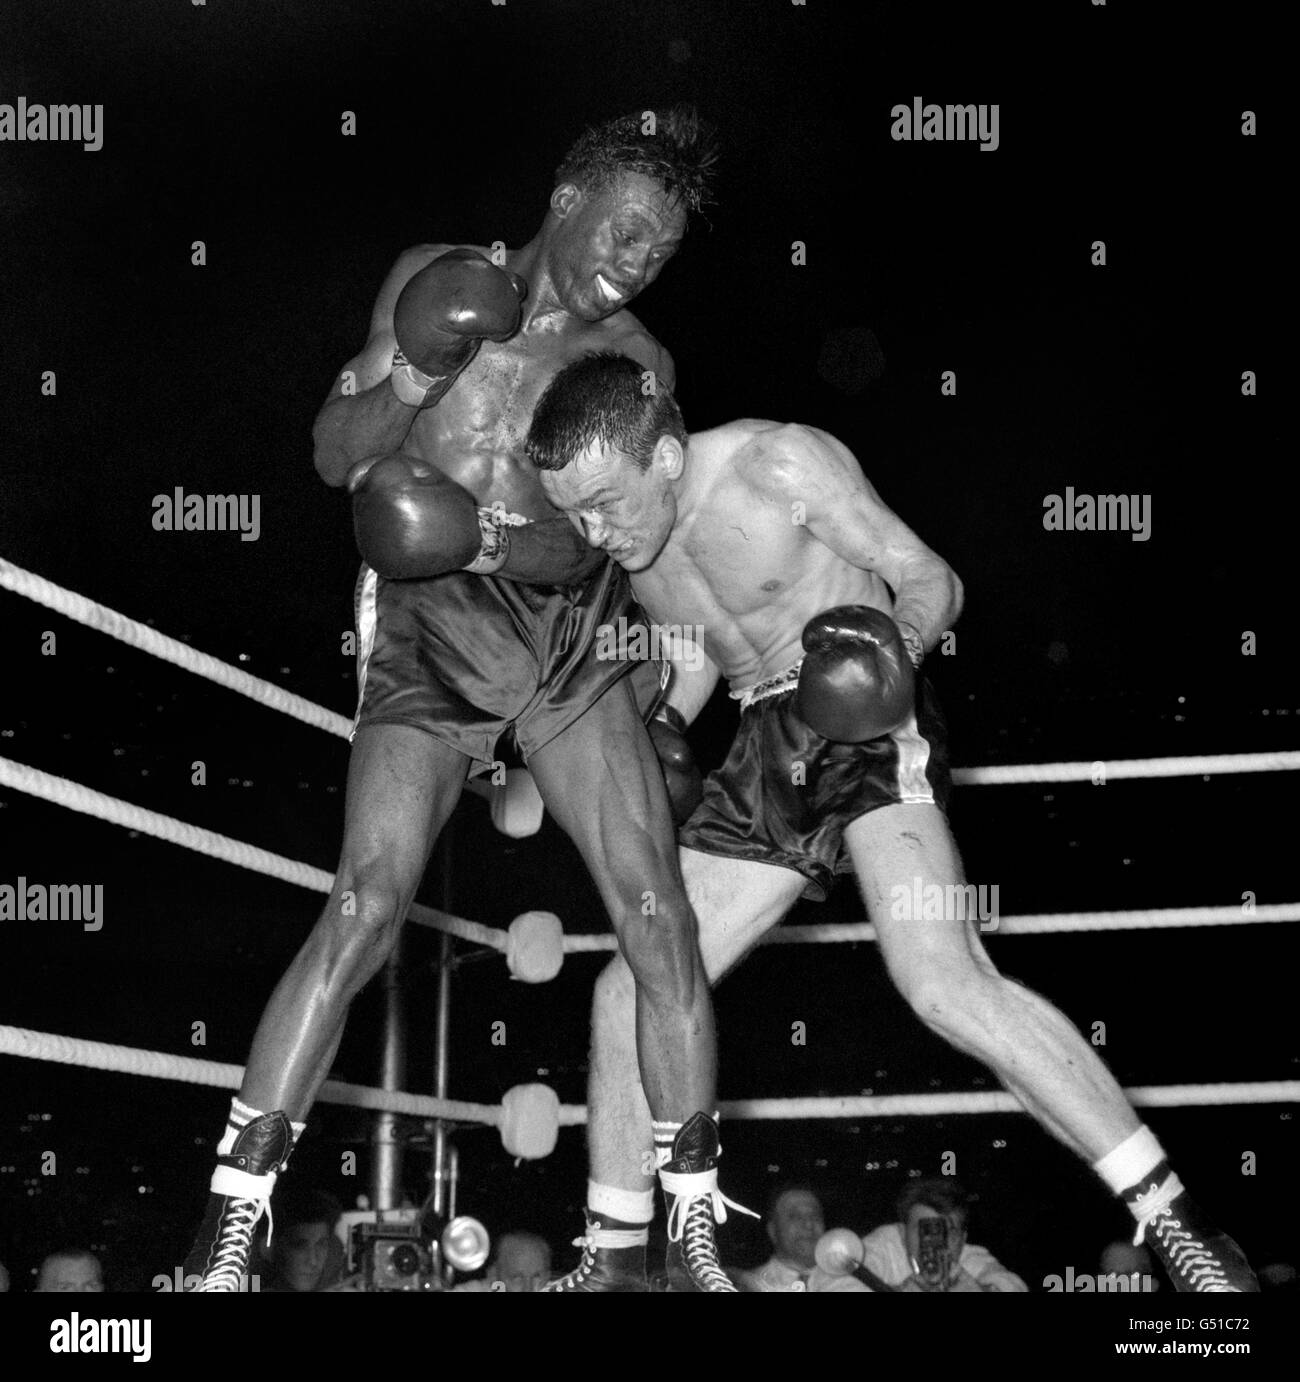 British challenger Dave Charnley (r) works on the lower body of American Joe Brown during the fight. Joe Brown went on to win on points after 15 rounds. The fight was voted 1961 Ring Magazine Fight of the Year. Stock Photo